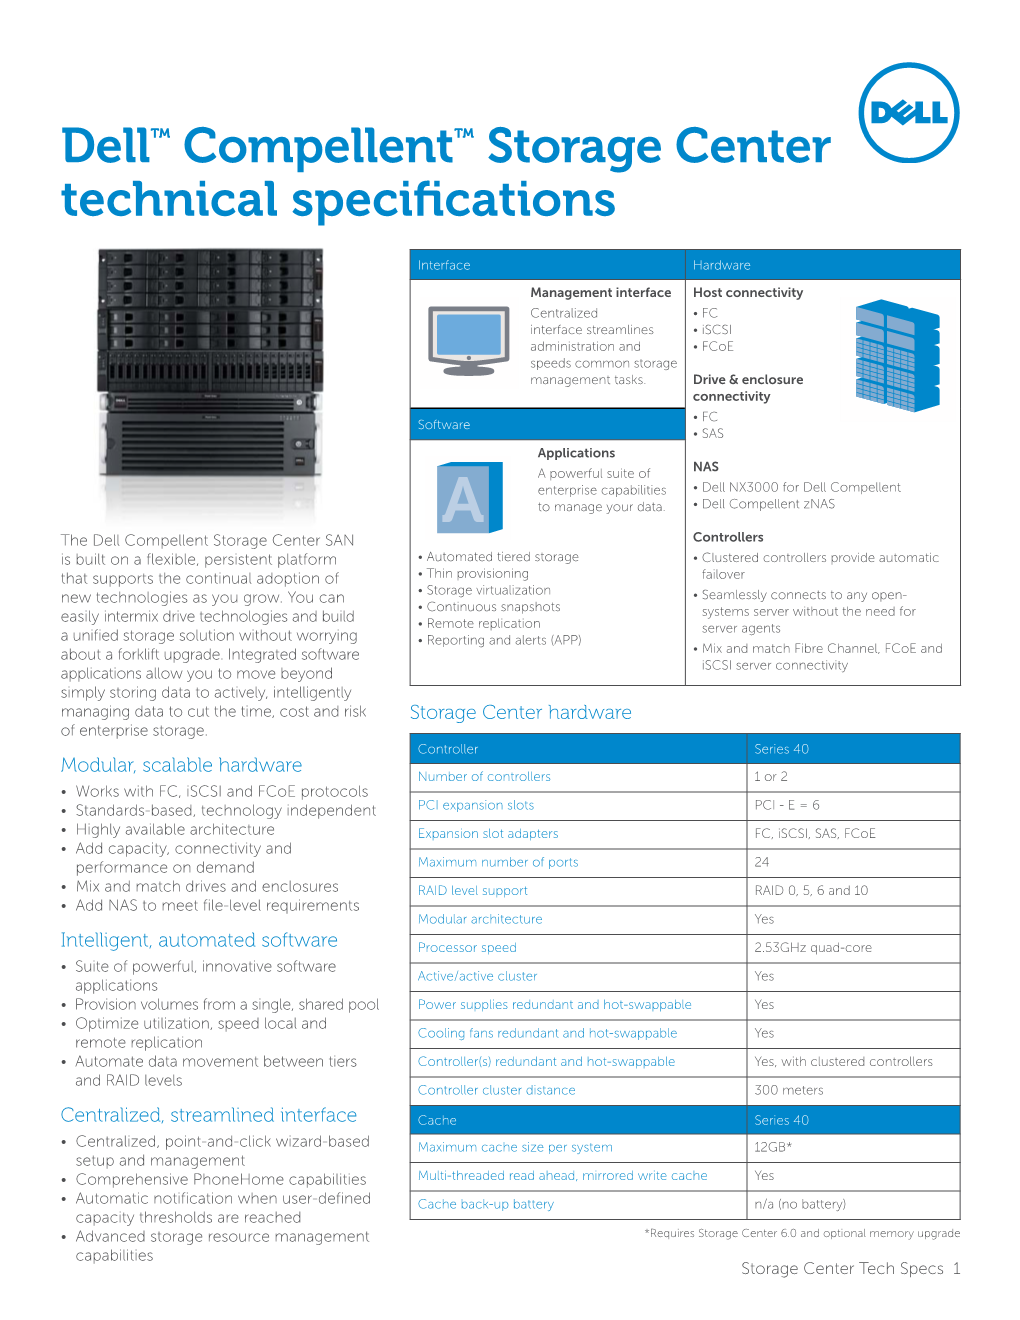 Dell™ Compellent™ Storage Center Technical Specifications